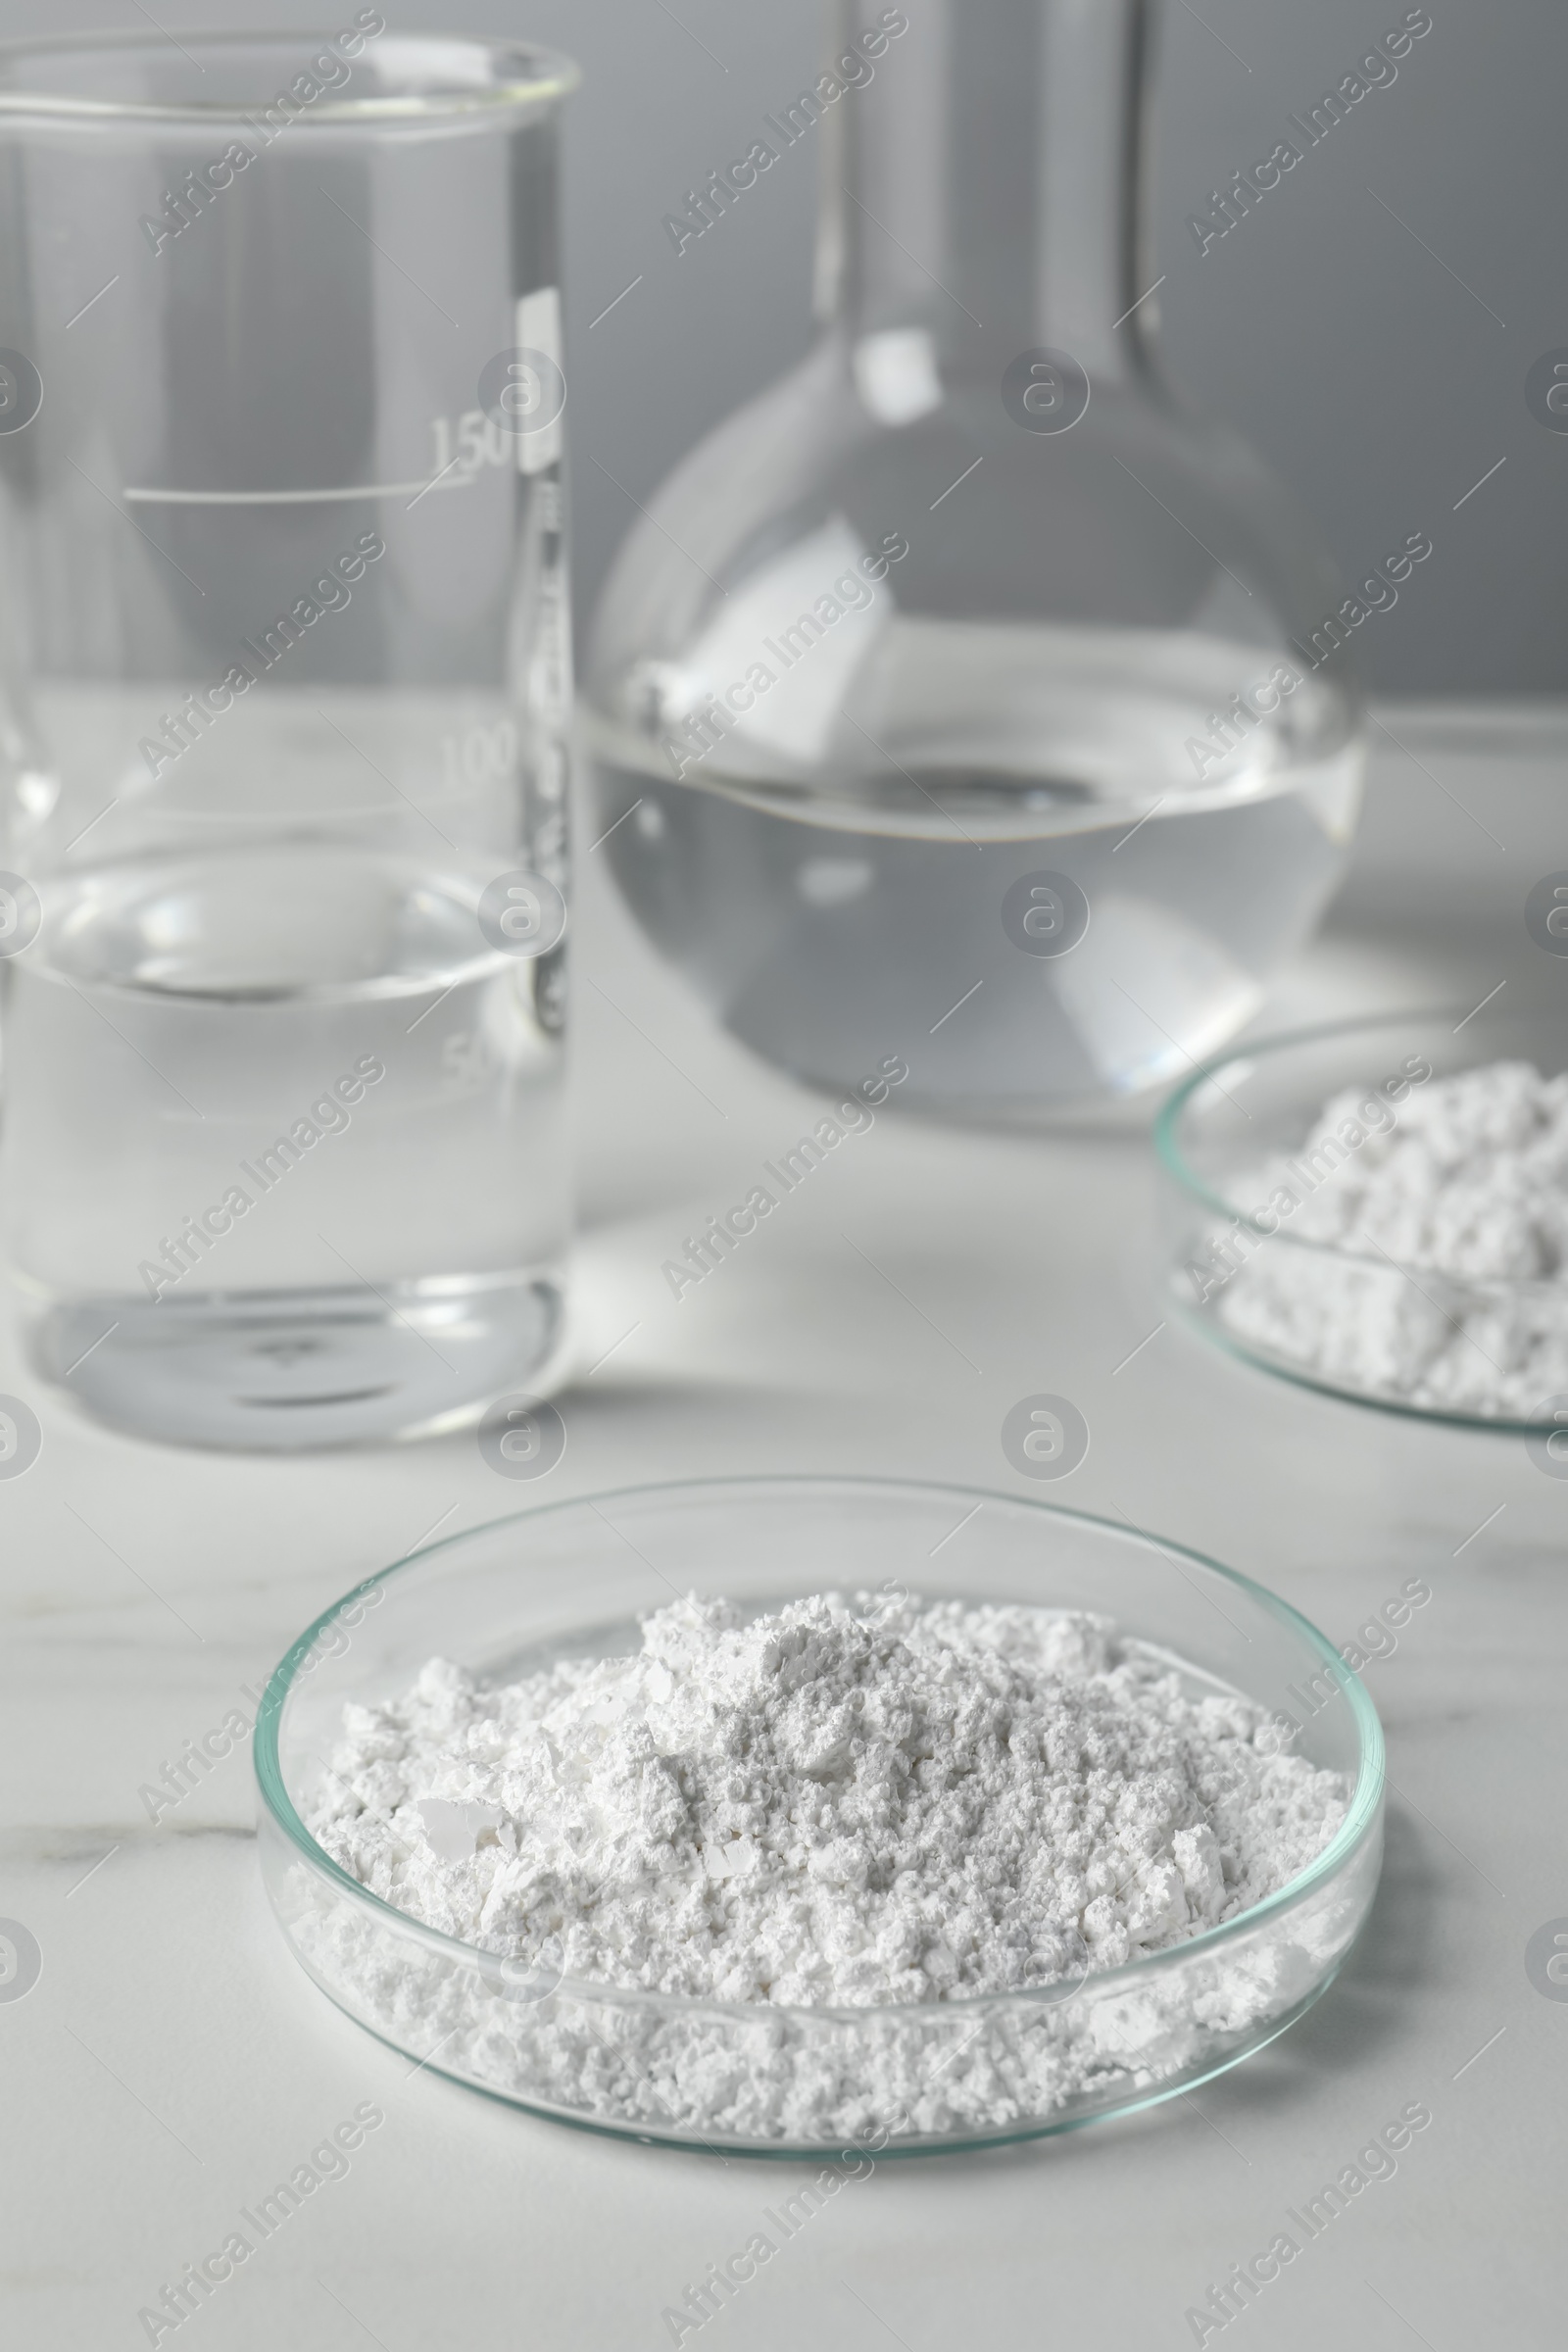 Photo of Petri dishes with calcium carbonate powder and laboratory glassware on white marble table